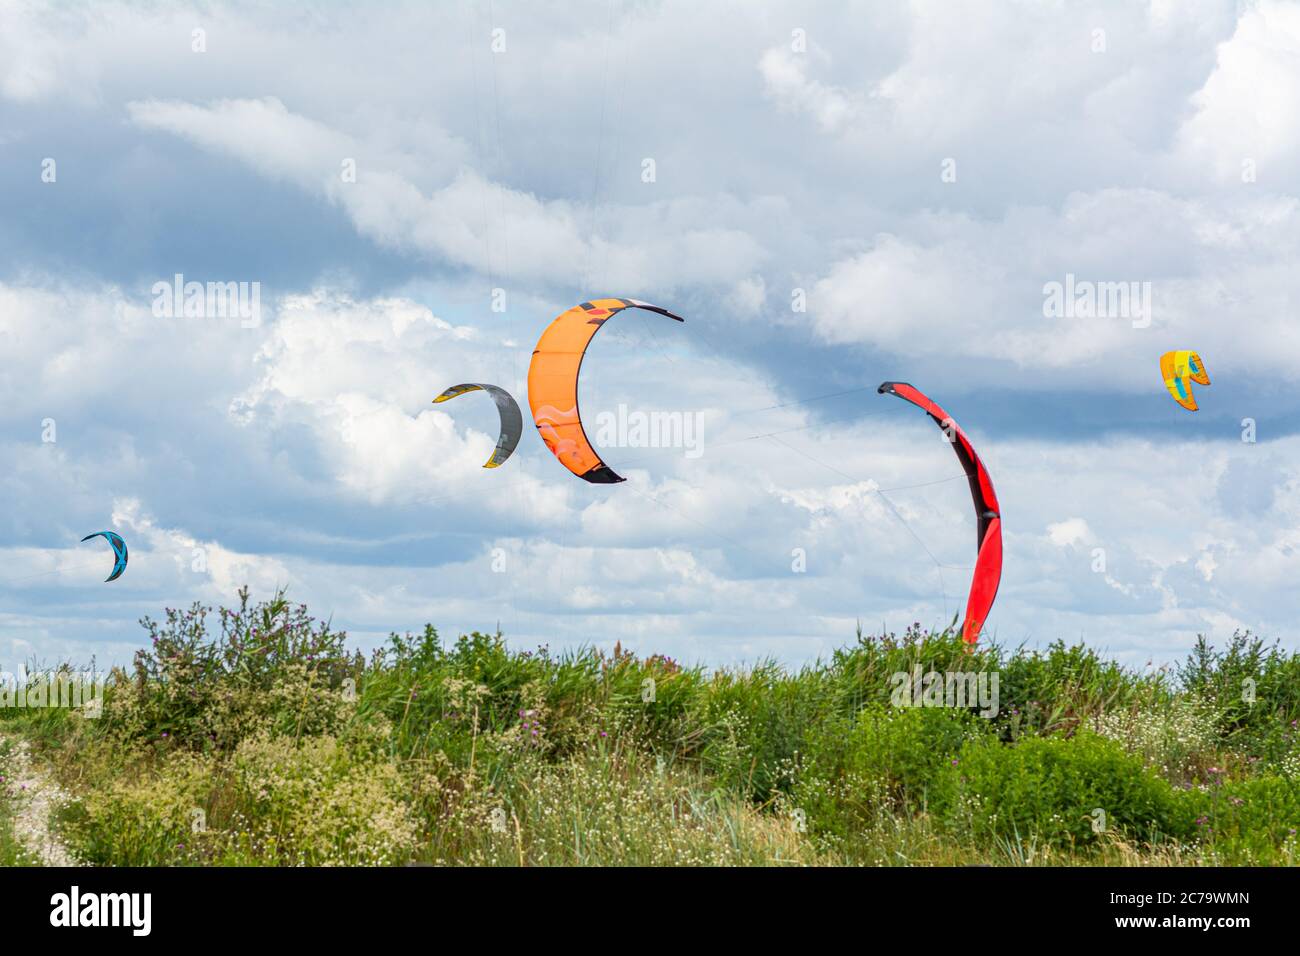 Malmo, Sweden - July 12, 2020: On a windy day many people take the opportunity to do watersports. Kitesurfers gather near Lomma beach to practice their kite surfing skills Stock Photo